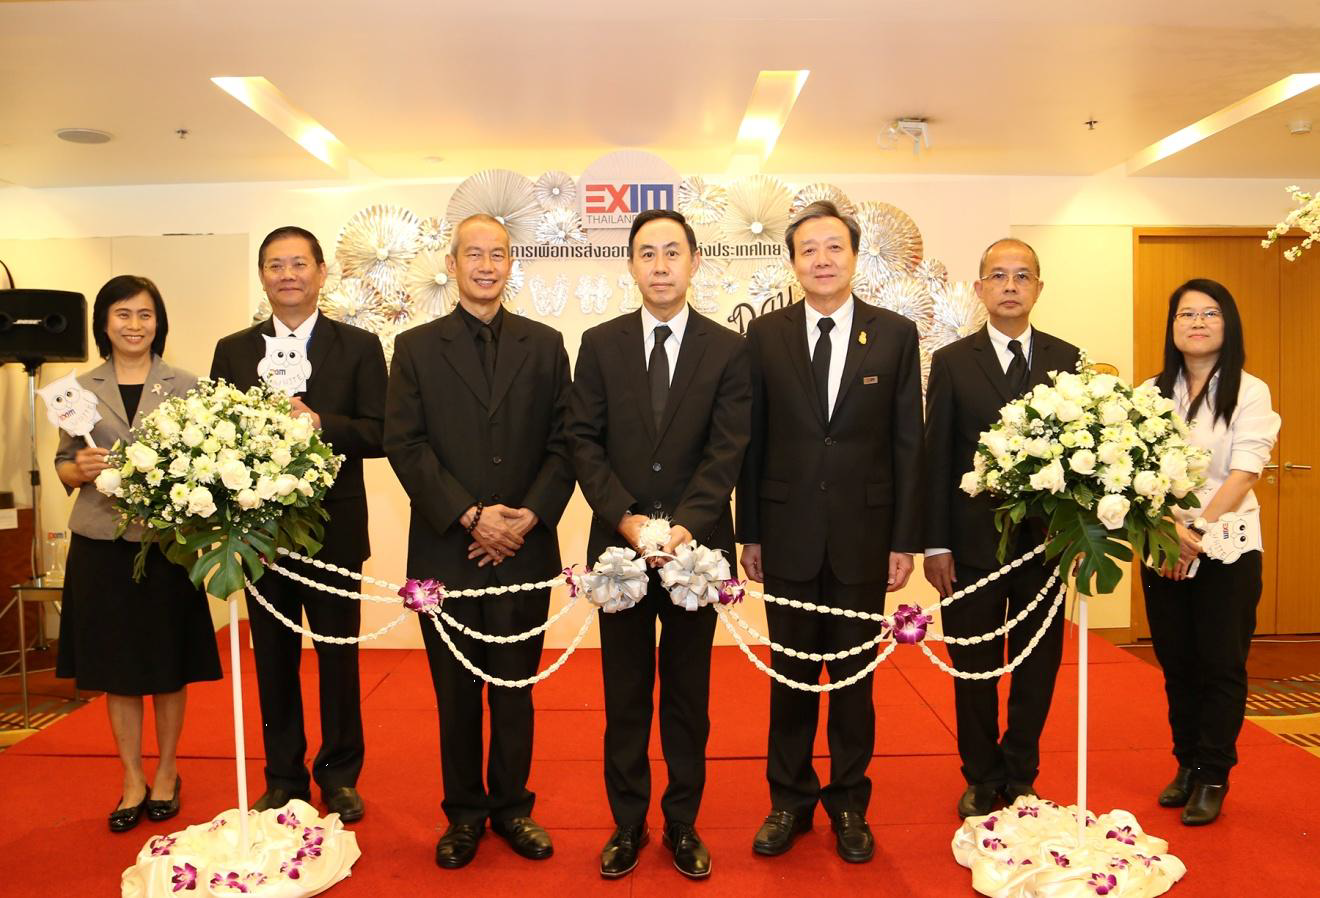 EXIM Thailand Holds “EXIM White Day” Reiterating Commitment to Fight against Corruption